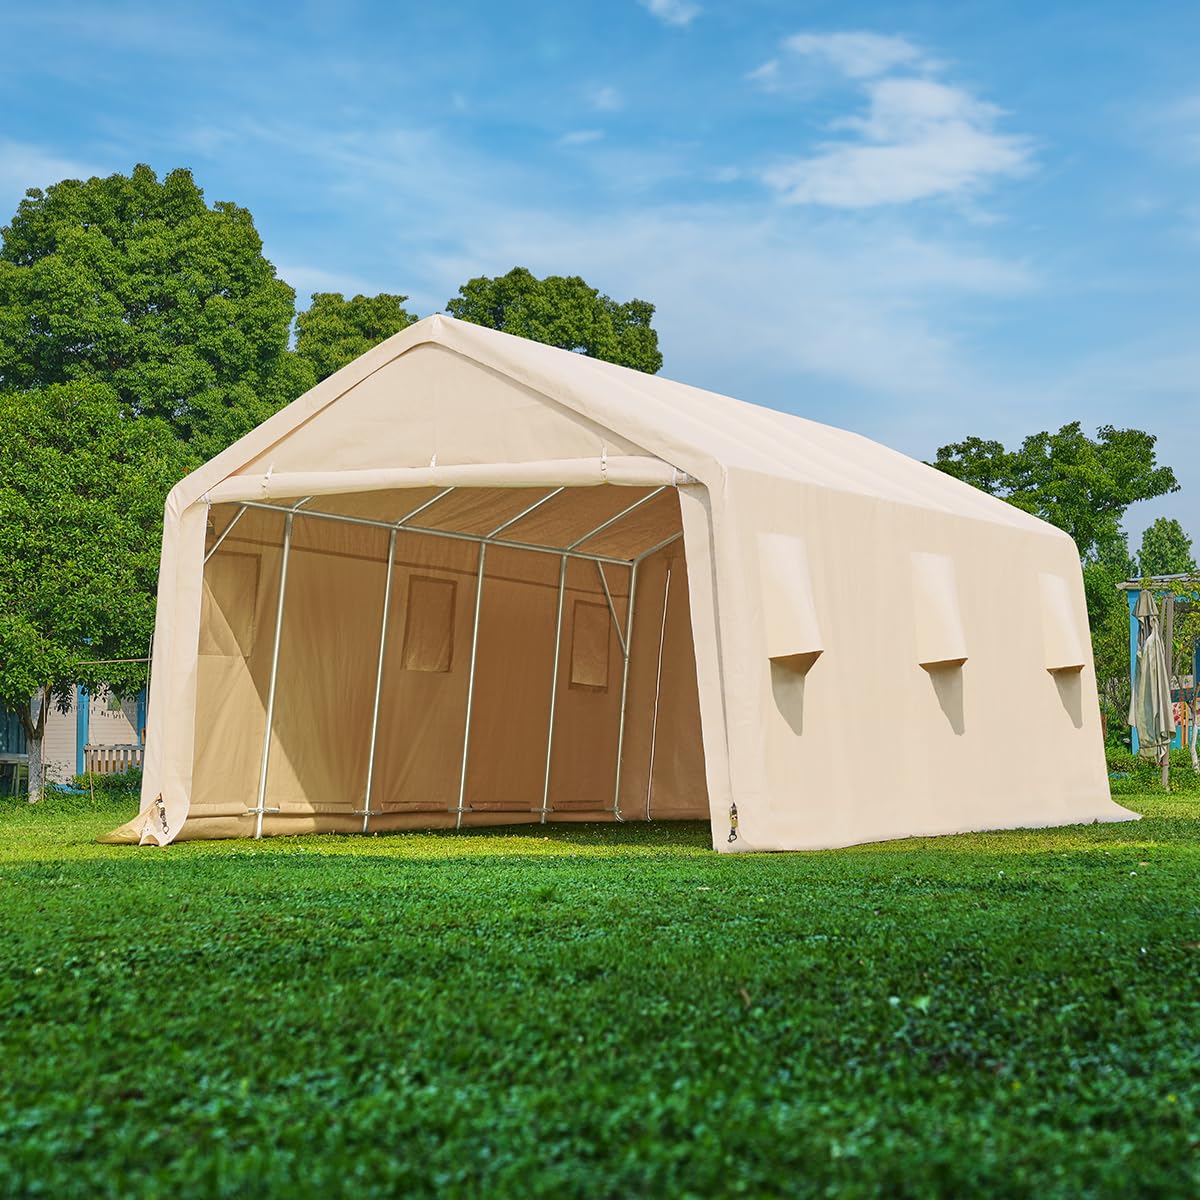 ADVANCE OUTDOOR 13x20 ft Garage Tent Carports with 2 Roll up Doors and Vents Outdoor Portable Storage Shelter for Vehicl Truck Boat Anti-UV S Resistant Waterproof, Beige, (8809BY-2) 13'x20'